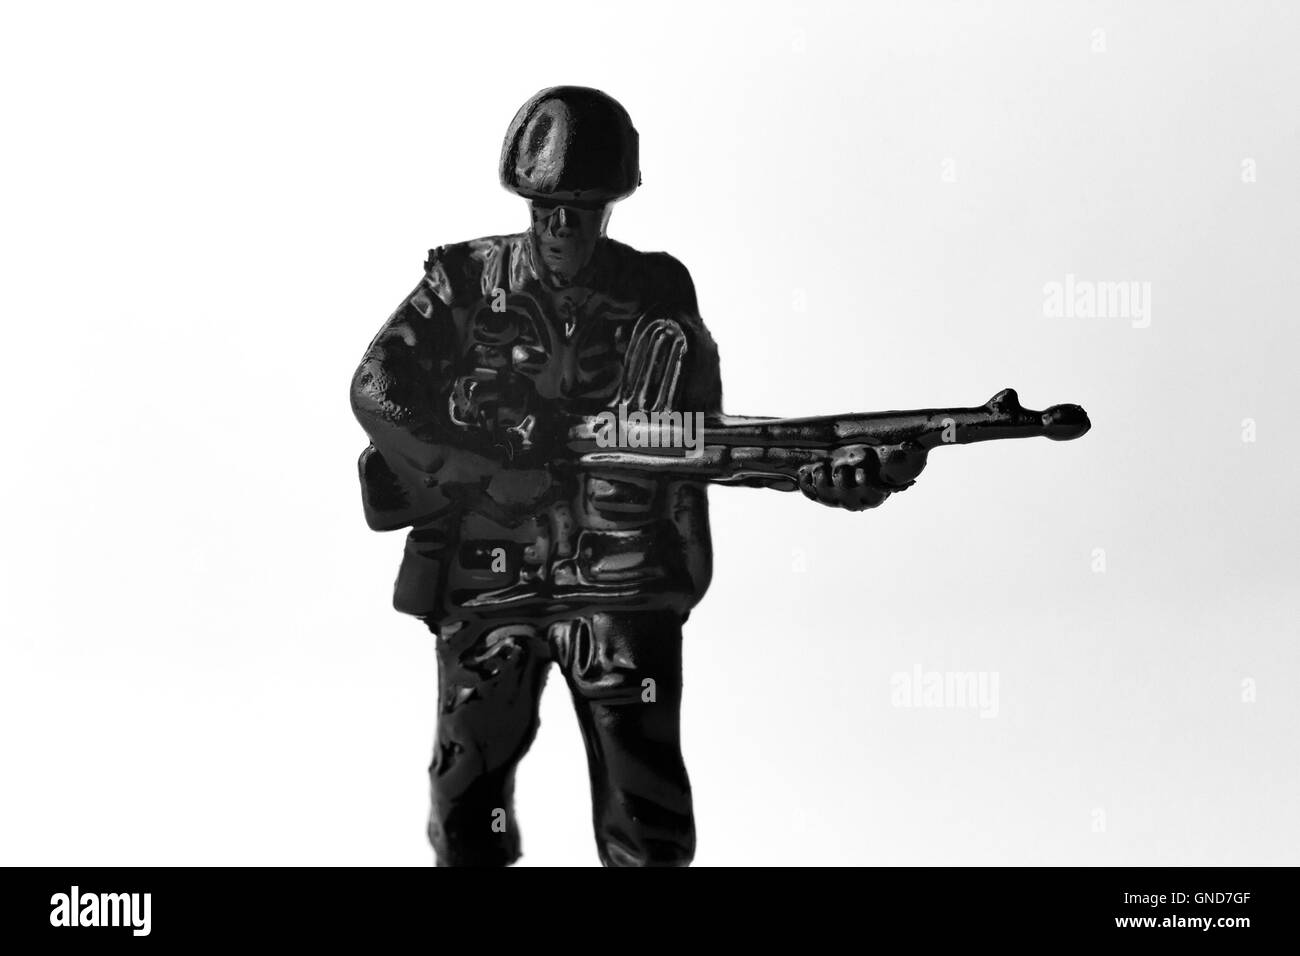 Dramatic toy army soldier marching to battle black and white image Stock Photo